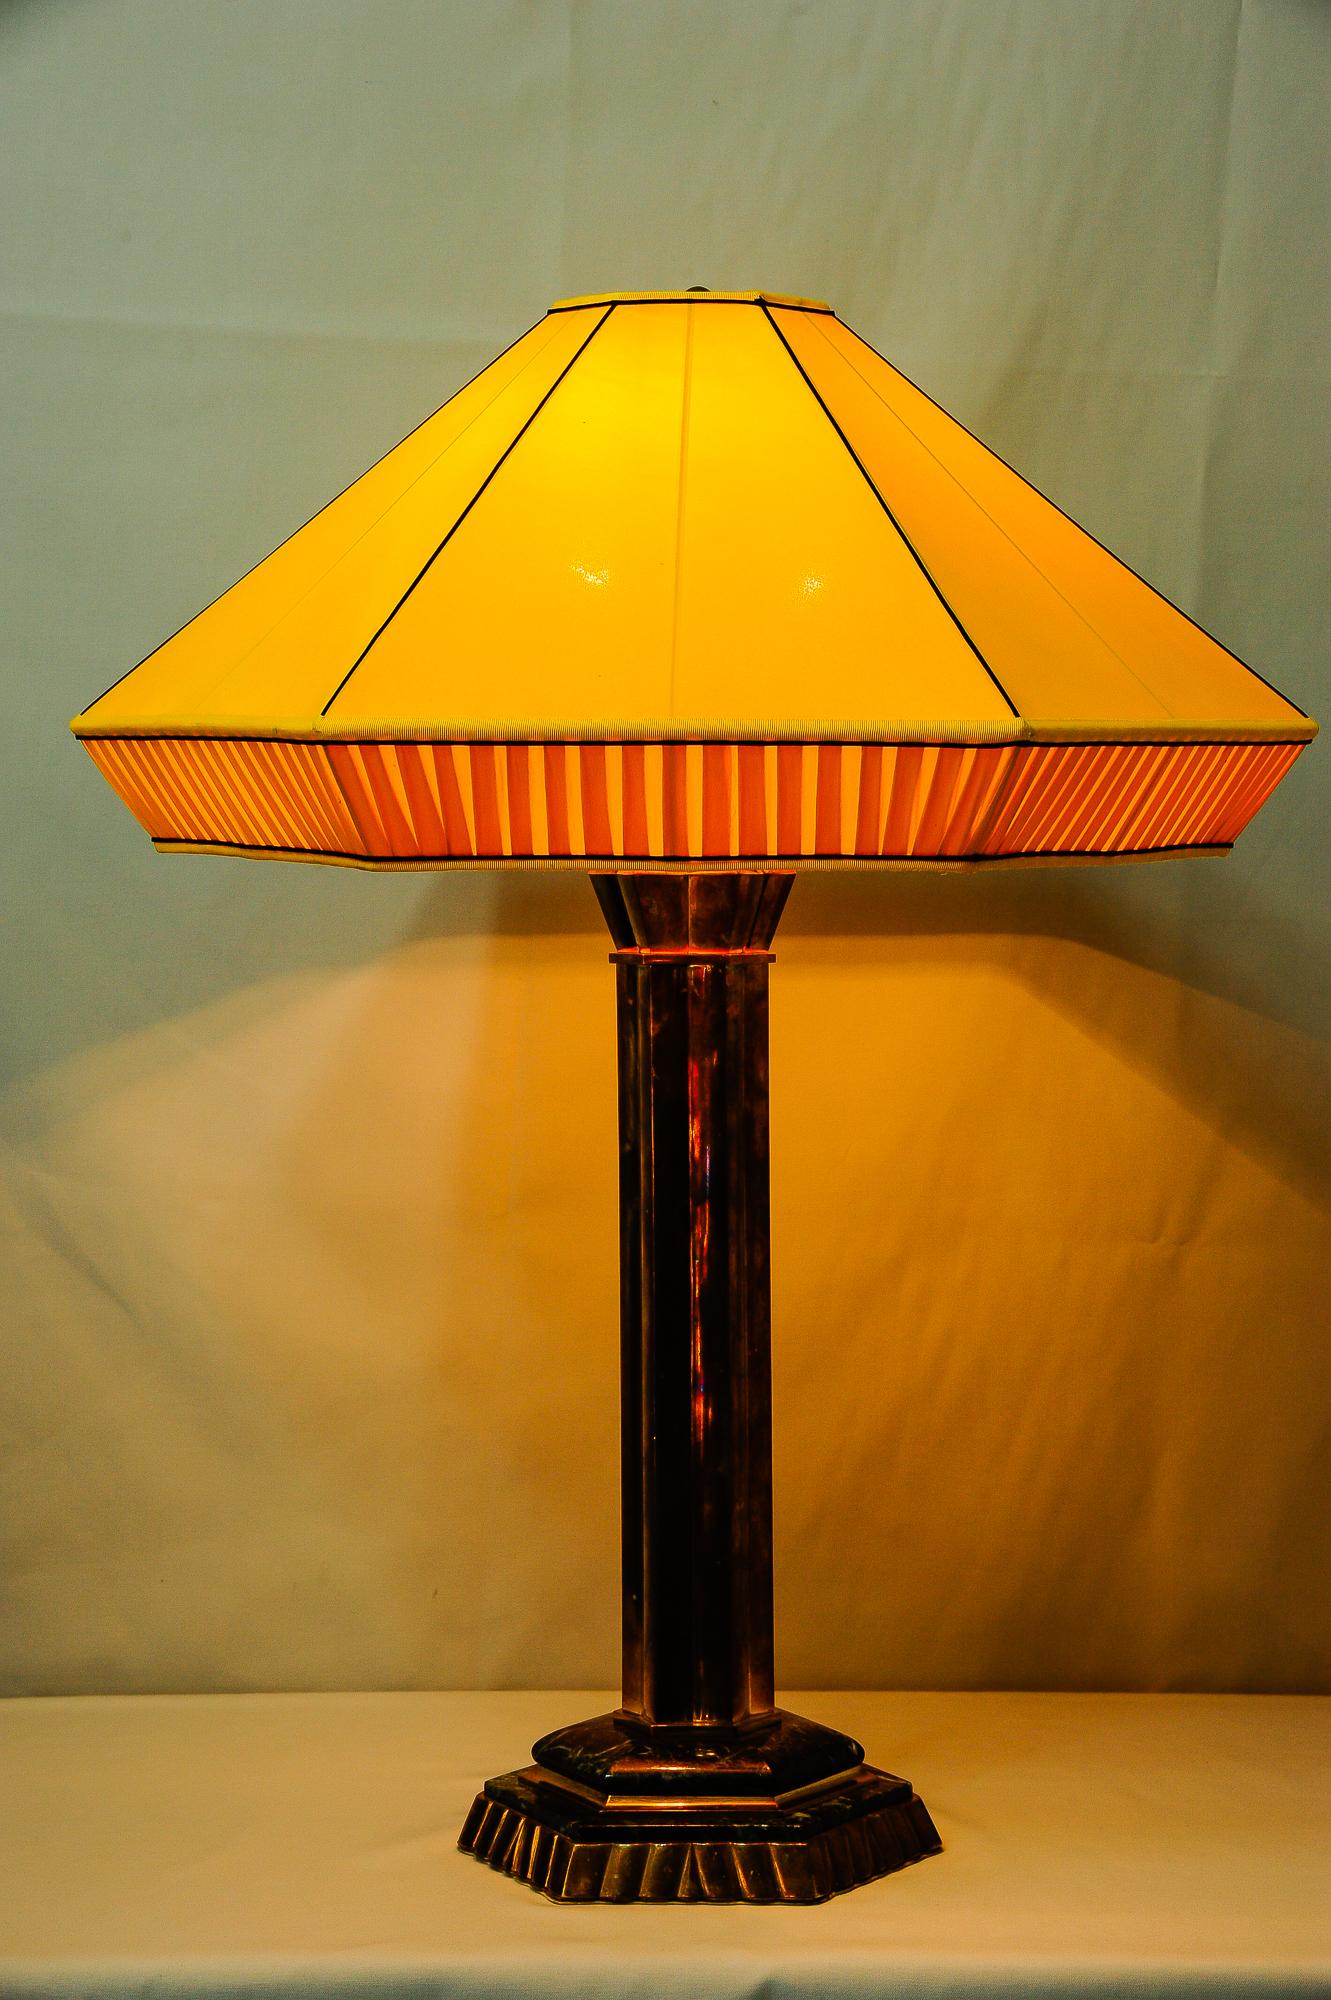 Huge Art Deco table lamp, Austria, 1920s
Marble and brass
Good original condition.